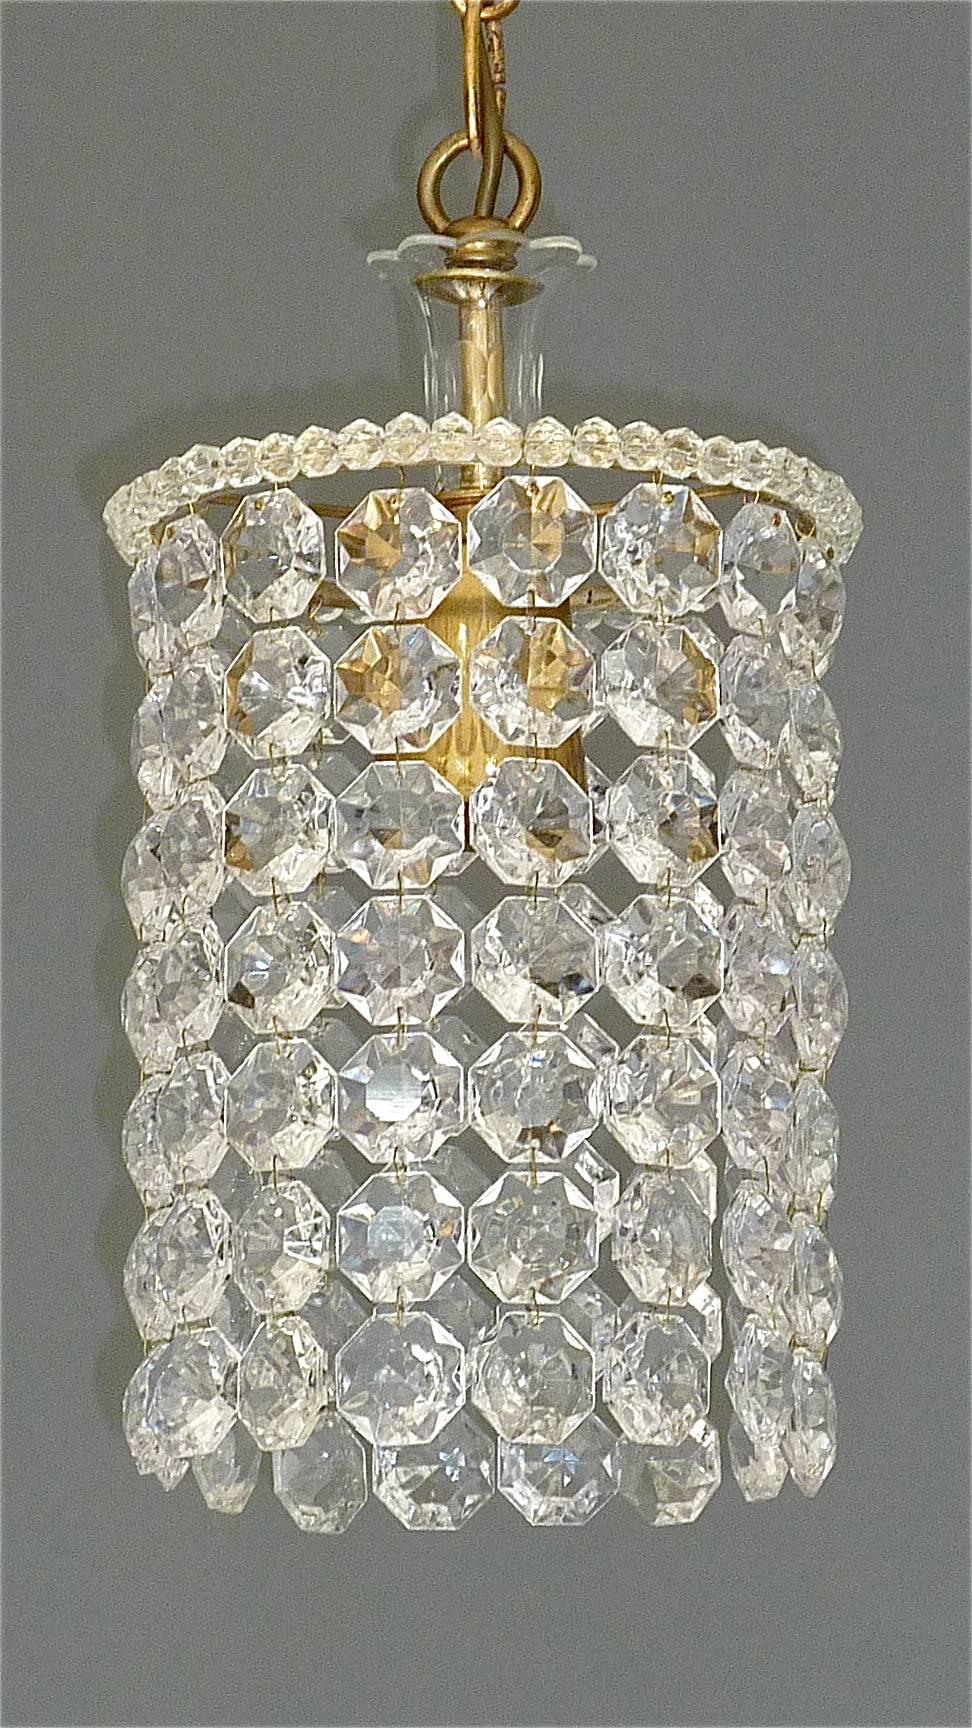 Precious petite midcentury chandelier made by the famous Austrian company Bakalowits, Vienna, Austria, circa 1955. The chain hanging height adjustable pendant lamp is made of patinated brass and lots of octagonal cut-glass crystal beads and pearls.